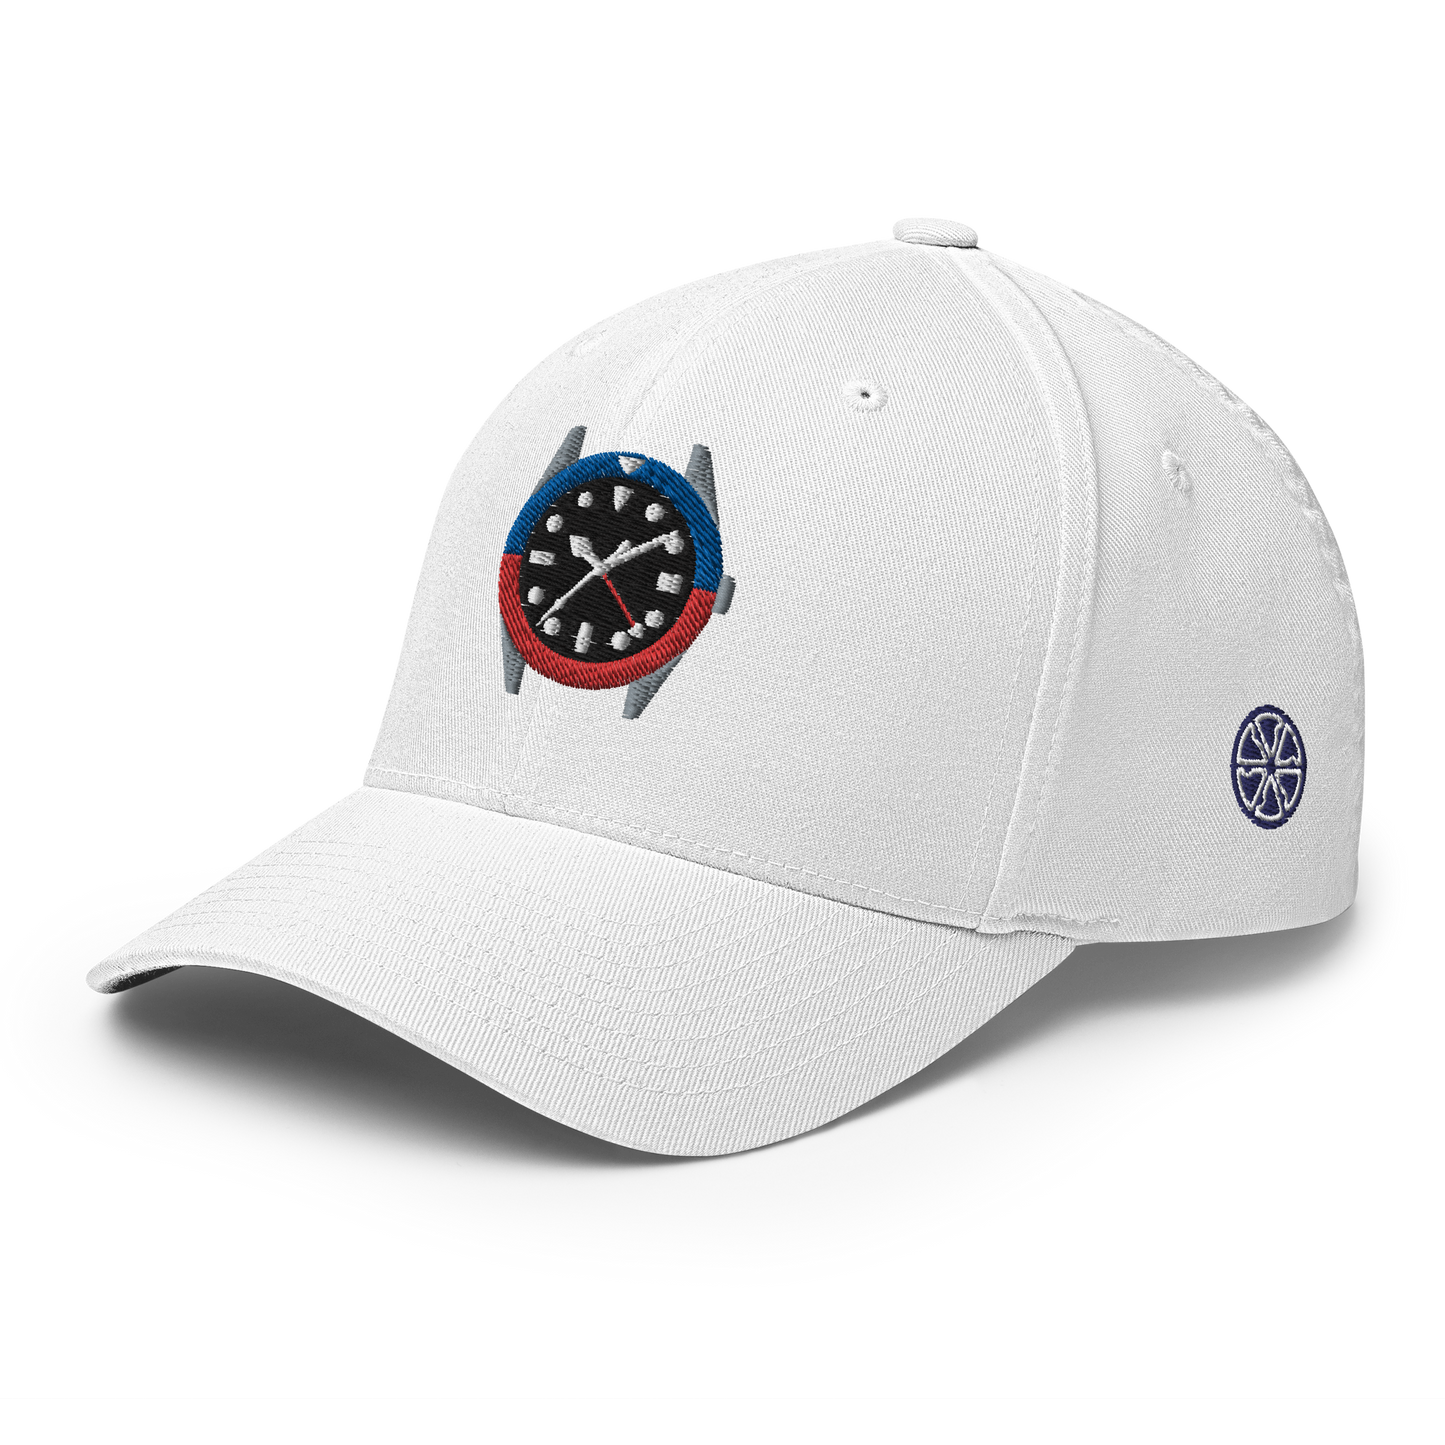 Cap inspired by the GMT MAster